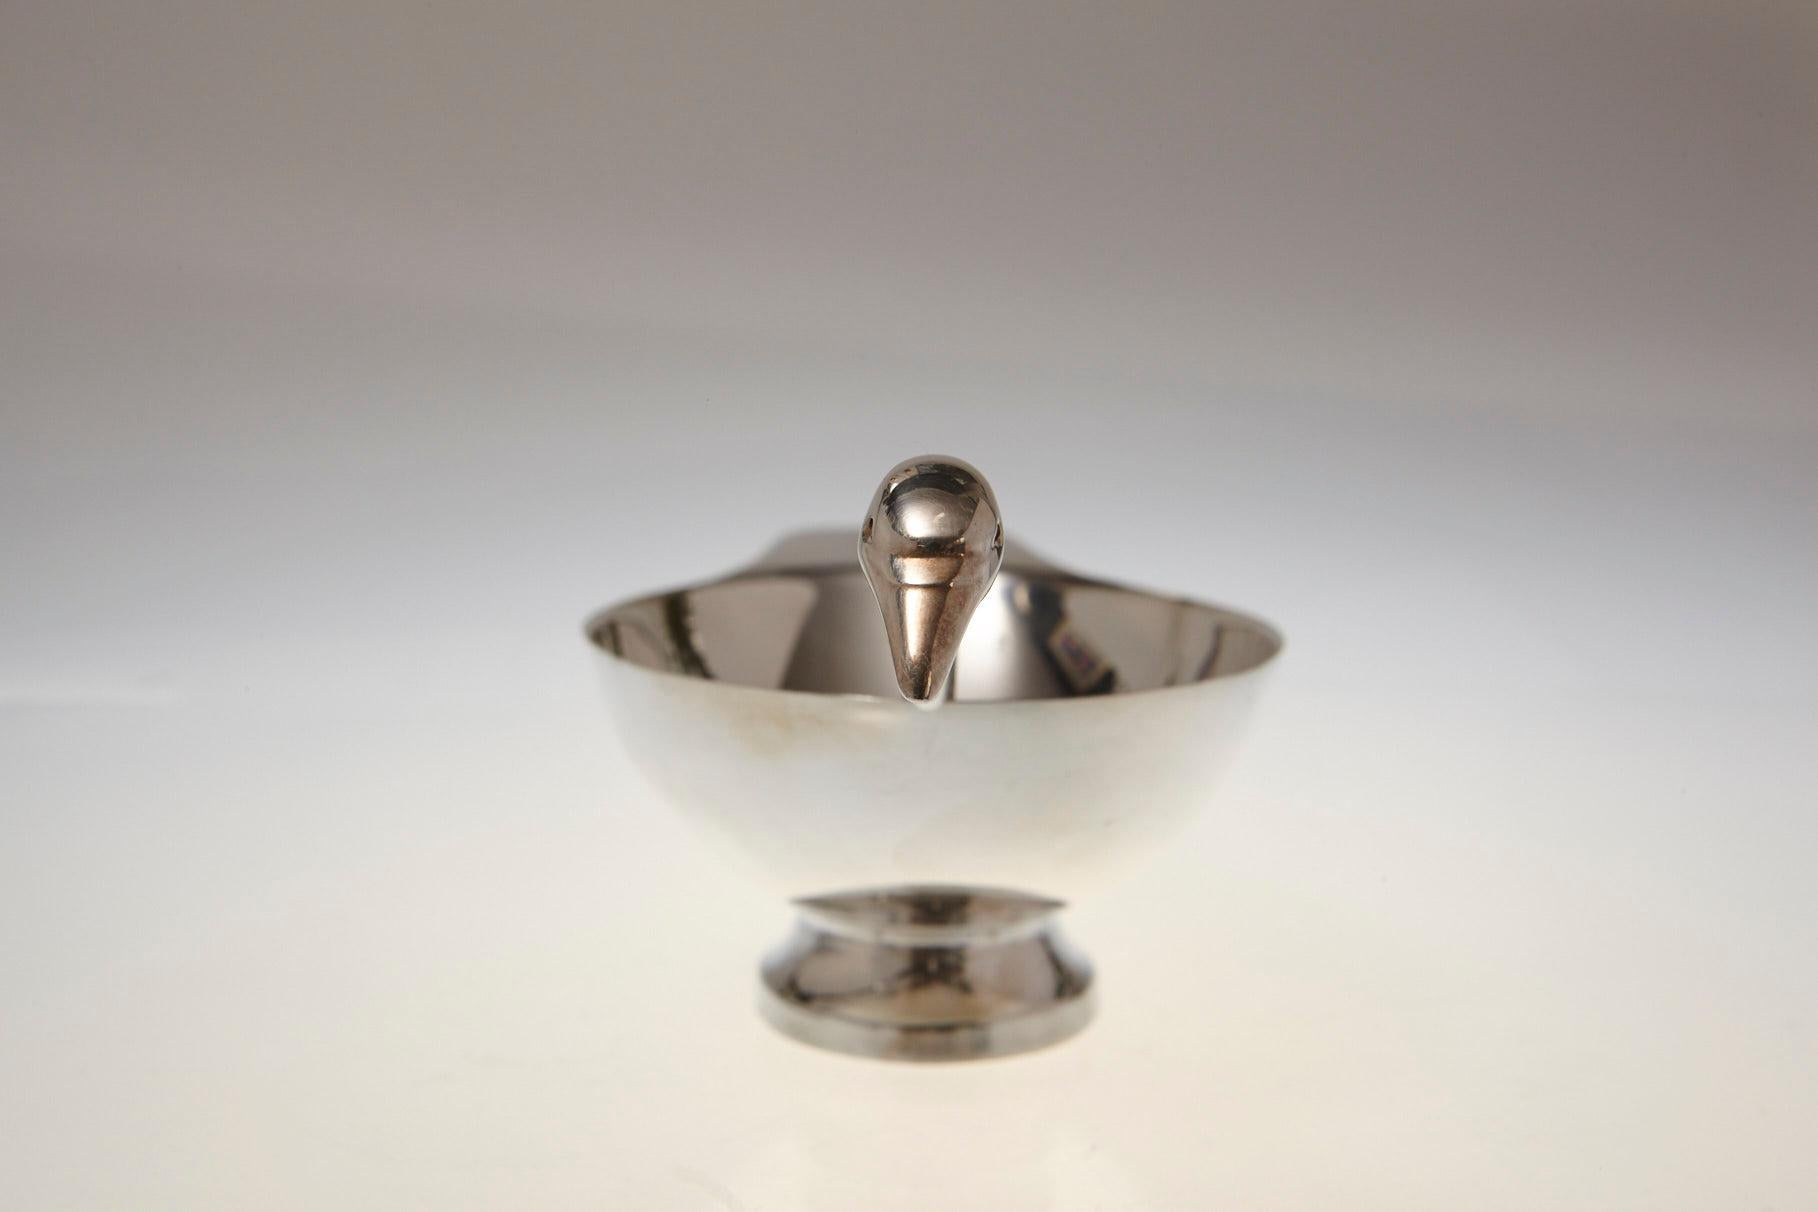 Silver Plate Sauciere Cygne, Swan Gravy Boat by Christian Fjerdingstad for Christofle, 1935